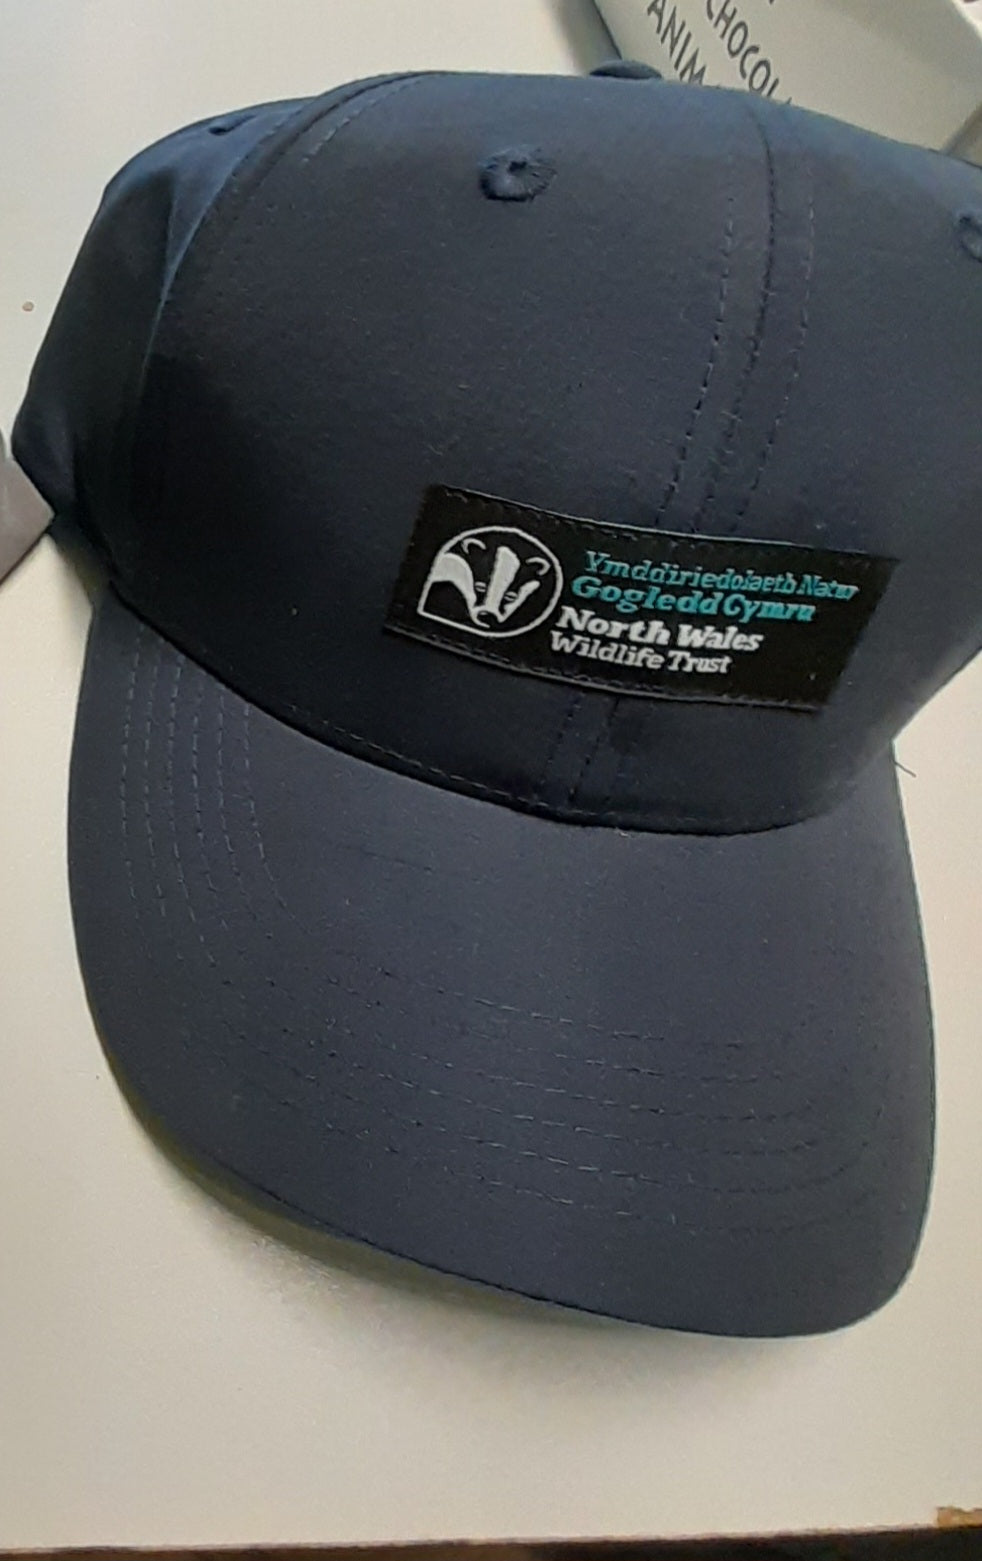 NWWT tagged baseball cap, recycled material - navy or grey